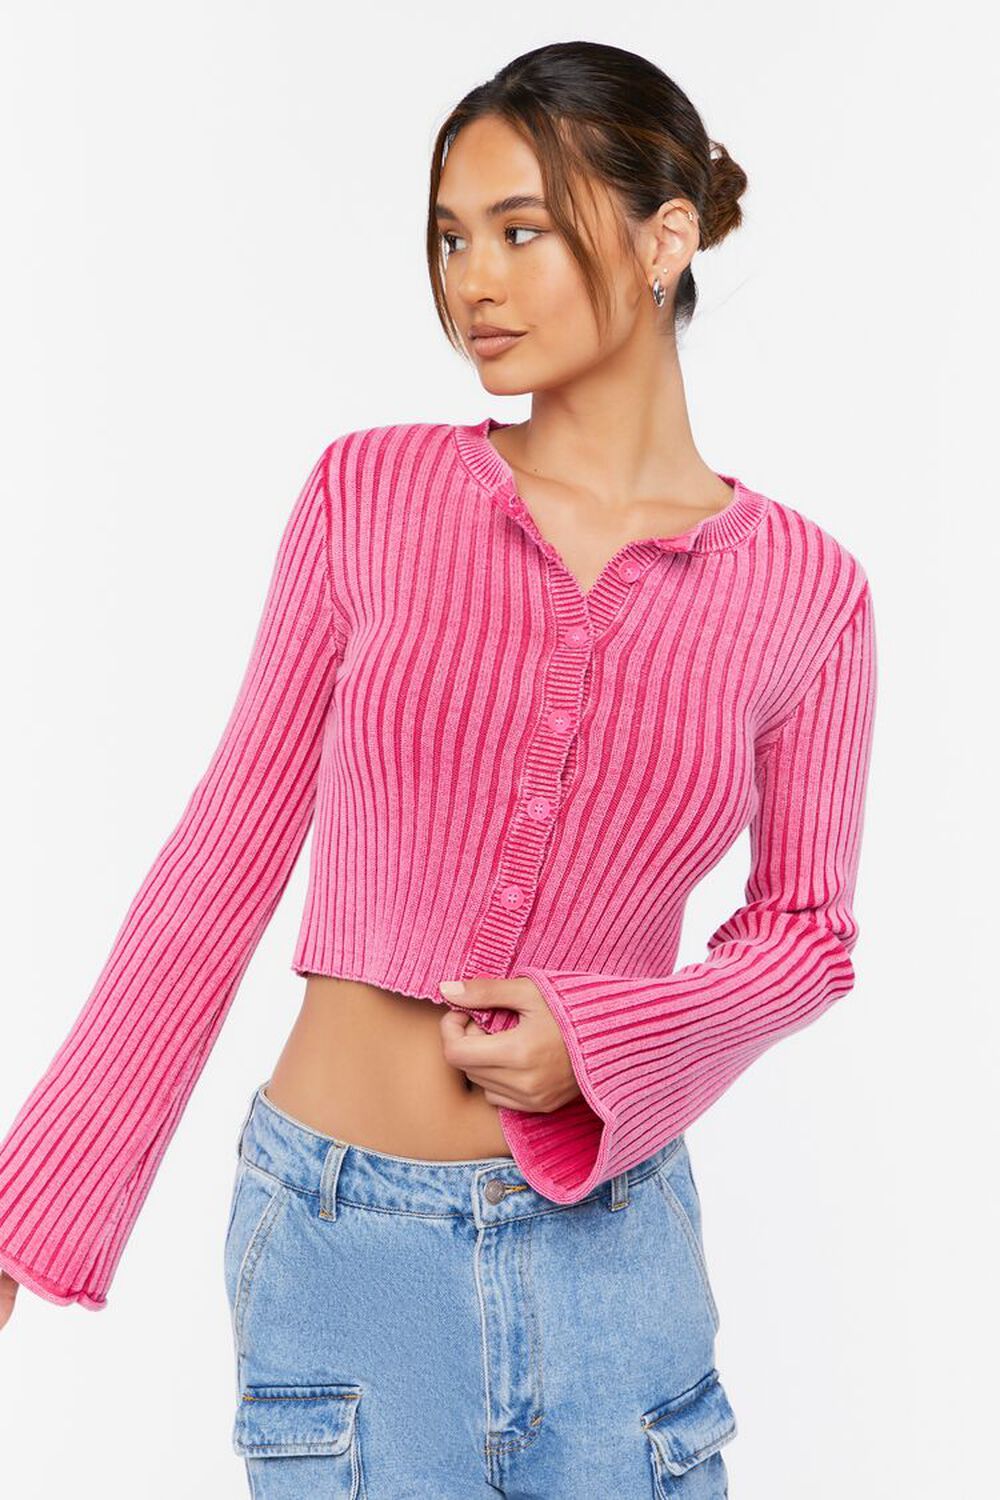 FUCHSIA Ribbed Bell-Sleeve Crop Top, image 1